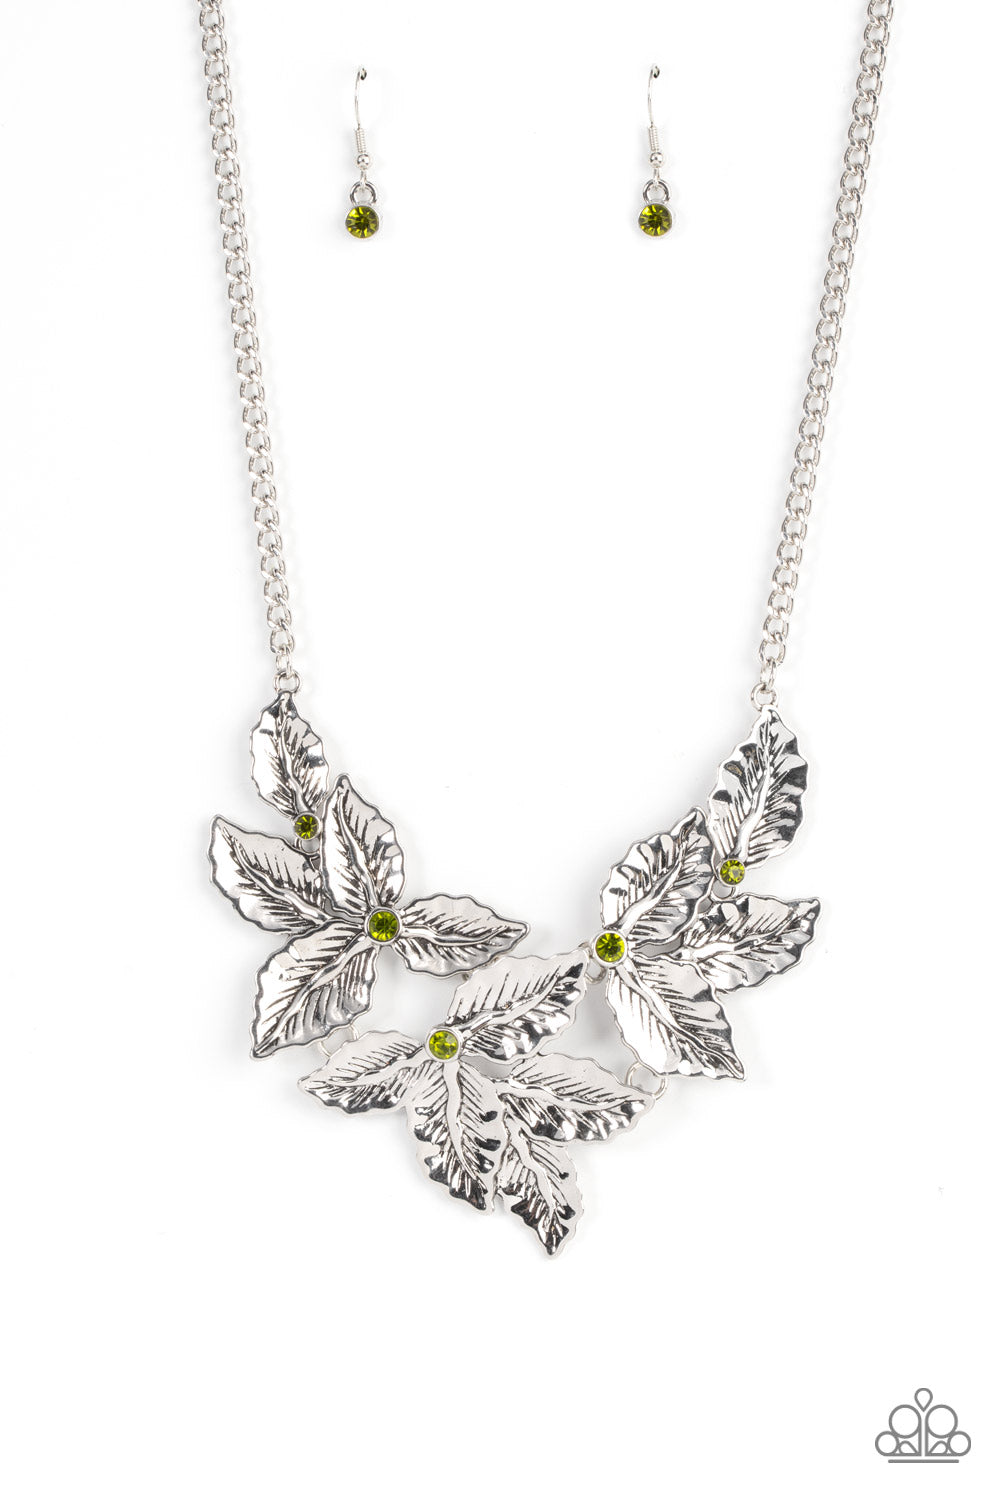 Paparazzi Accessories - Holly Heiress - Green Necklaces a textured collection of silver holly-like leaves are dotted with dainty green rhinestones as they bloom below the collar, invoking a festive spirit. Features an adjustable clasp closure.  Sold as one individual necklace. Includes one pair of matching earrings.